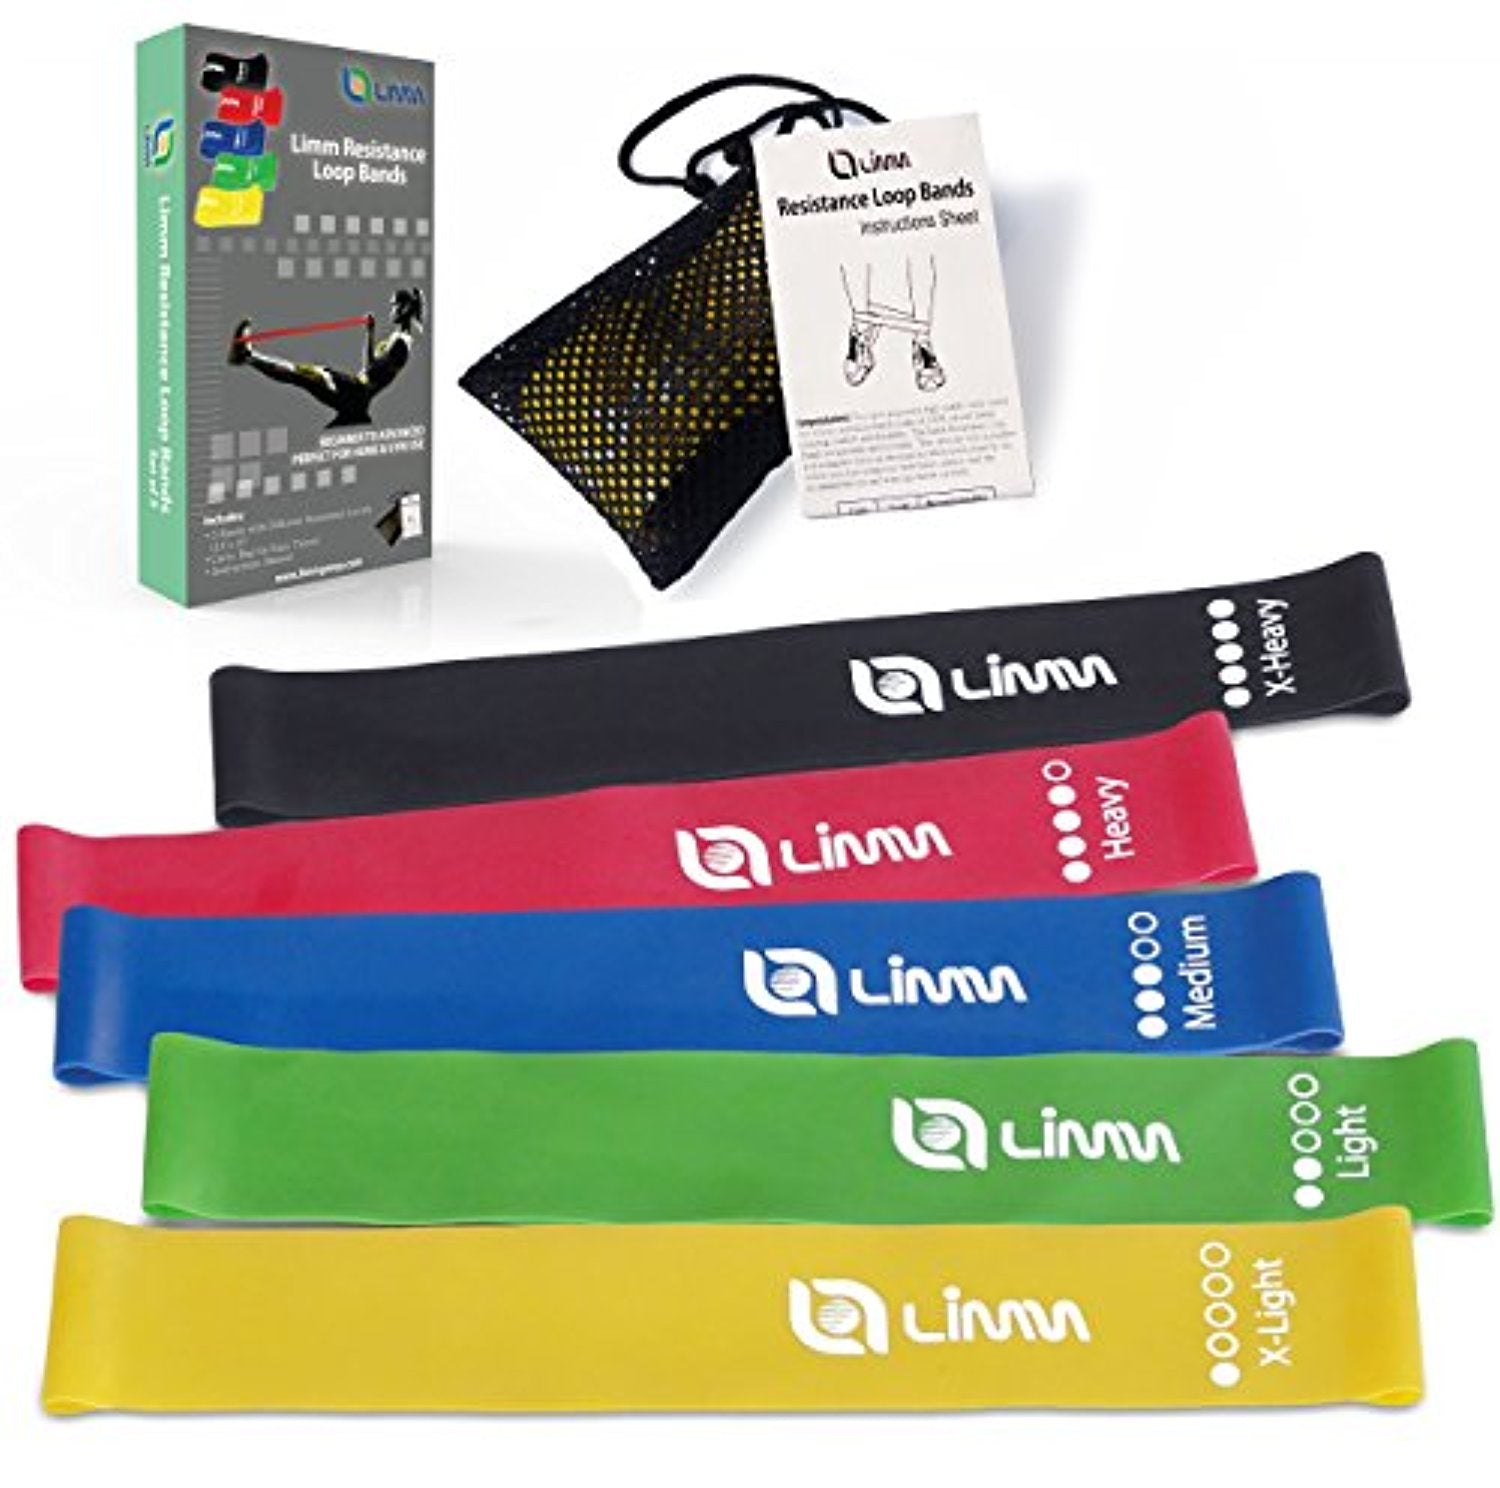 Premium Resistance Bands Exercise Loops - Set of 5, 12-inch Workout Bands - Everyday Crosstrain